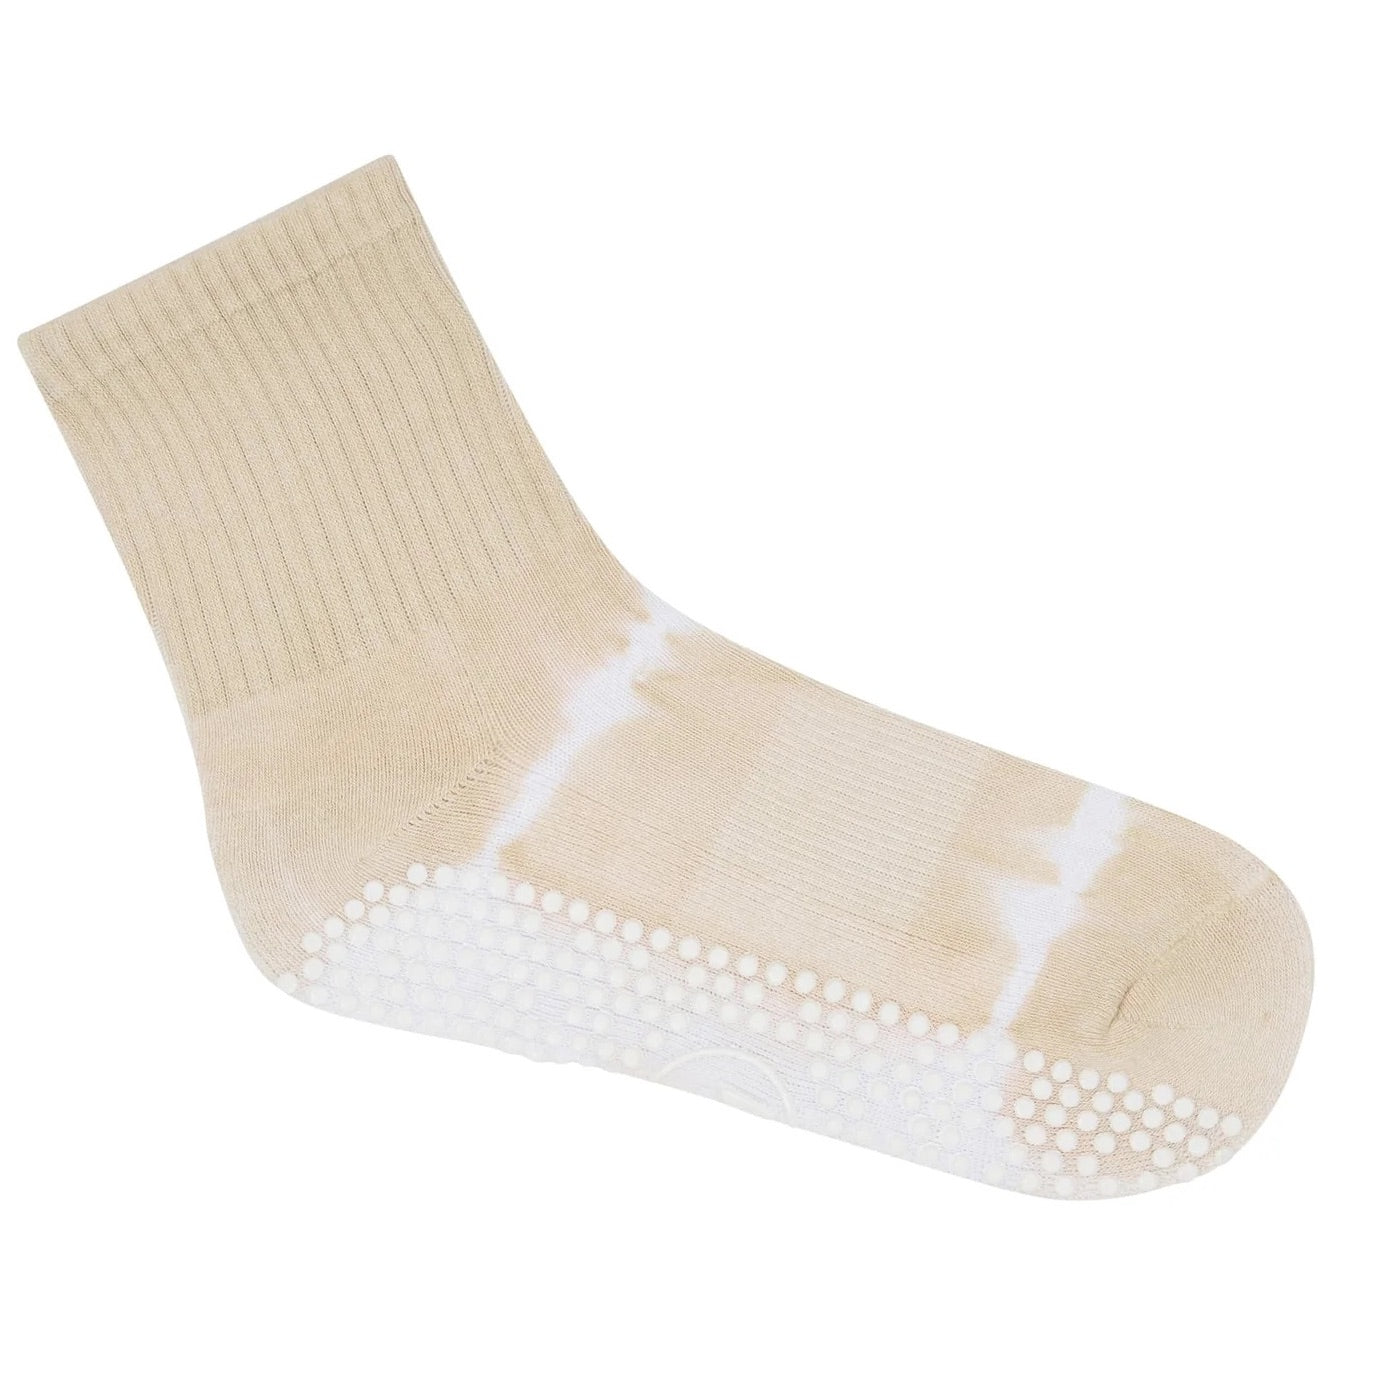 Allegro Tie Dye Grip Socks 3 Pack - Tucketts - simplyWORKOUT – SIMPLYWORKOUT